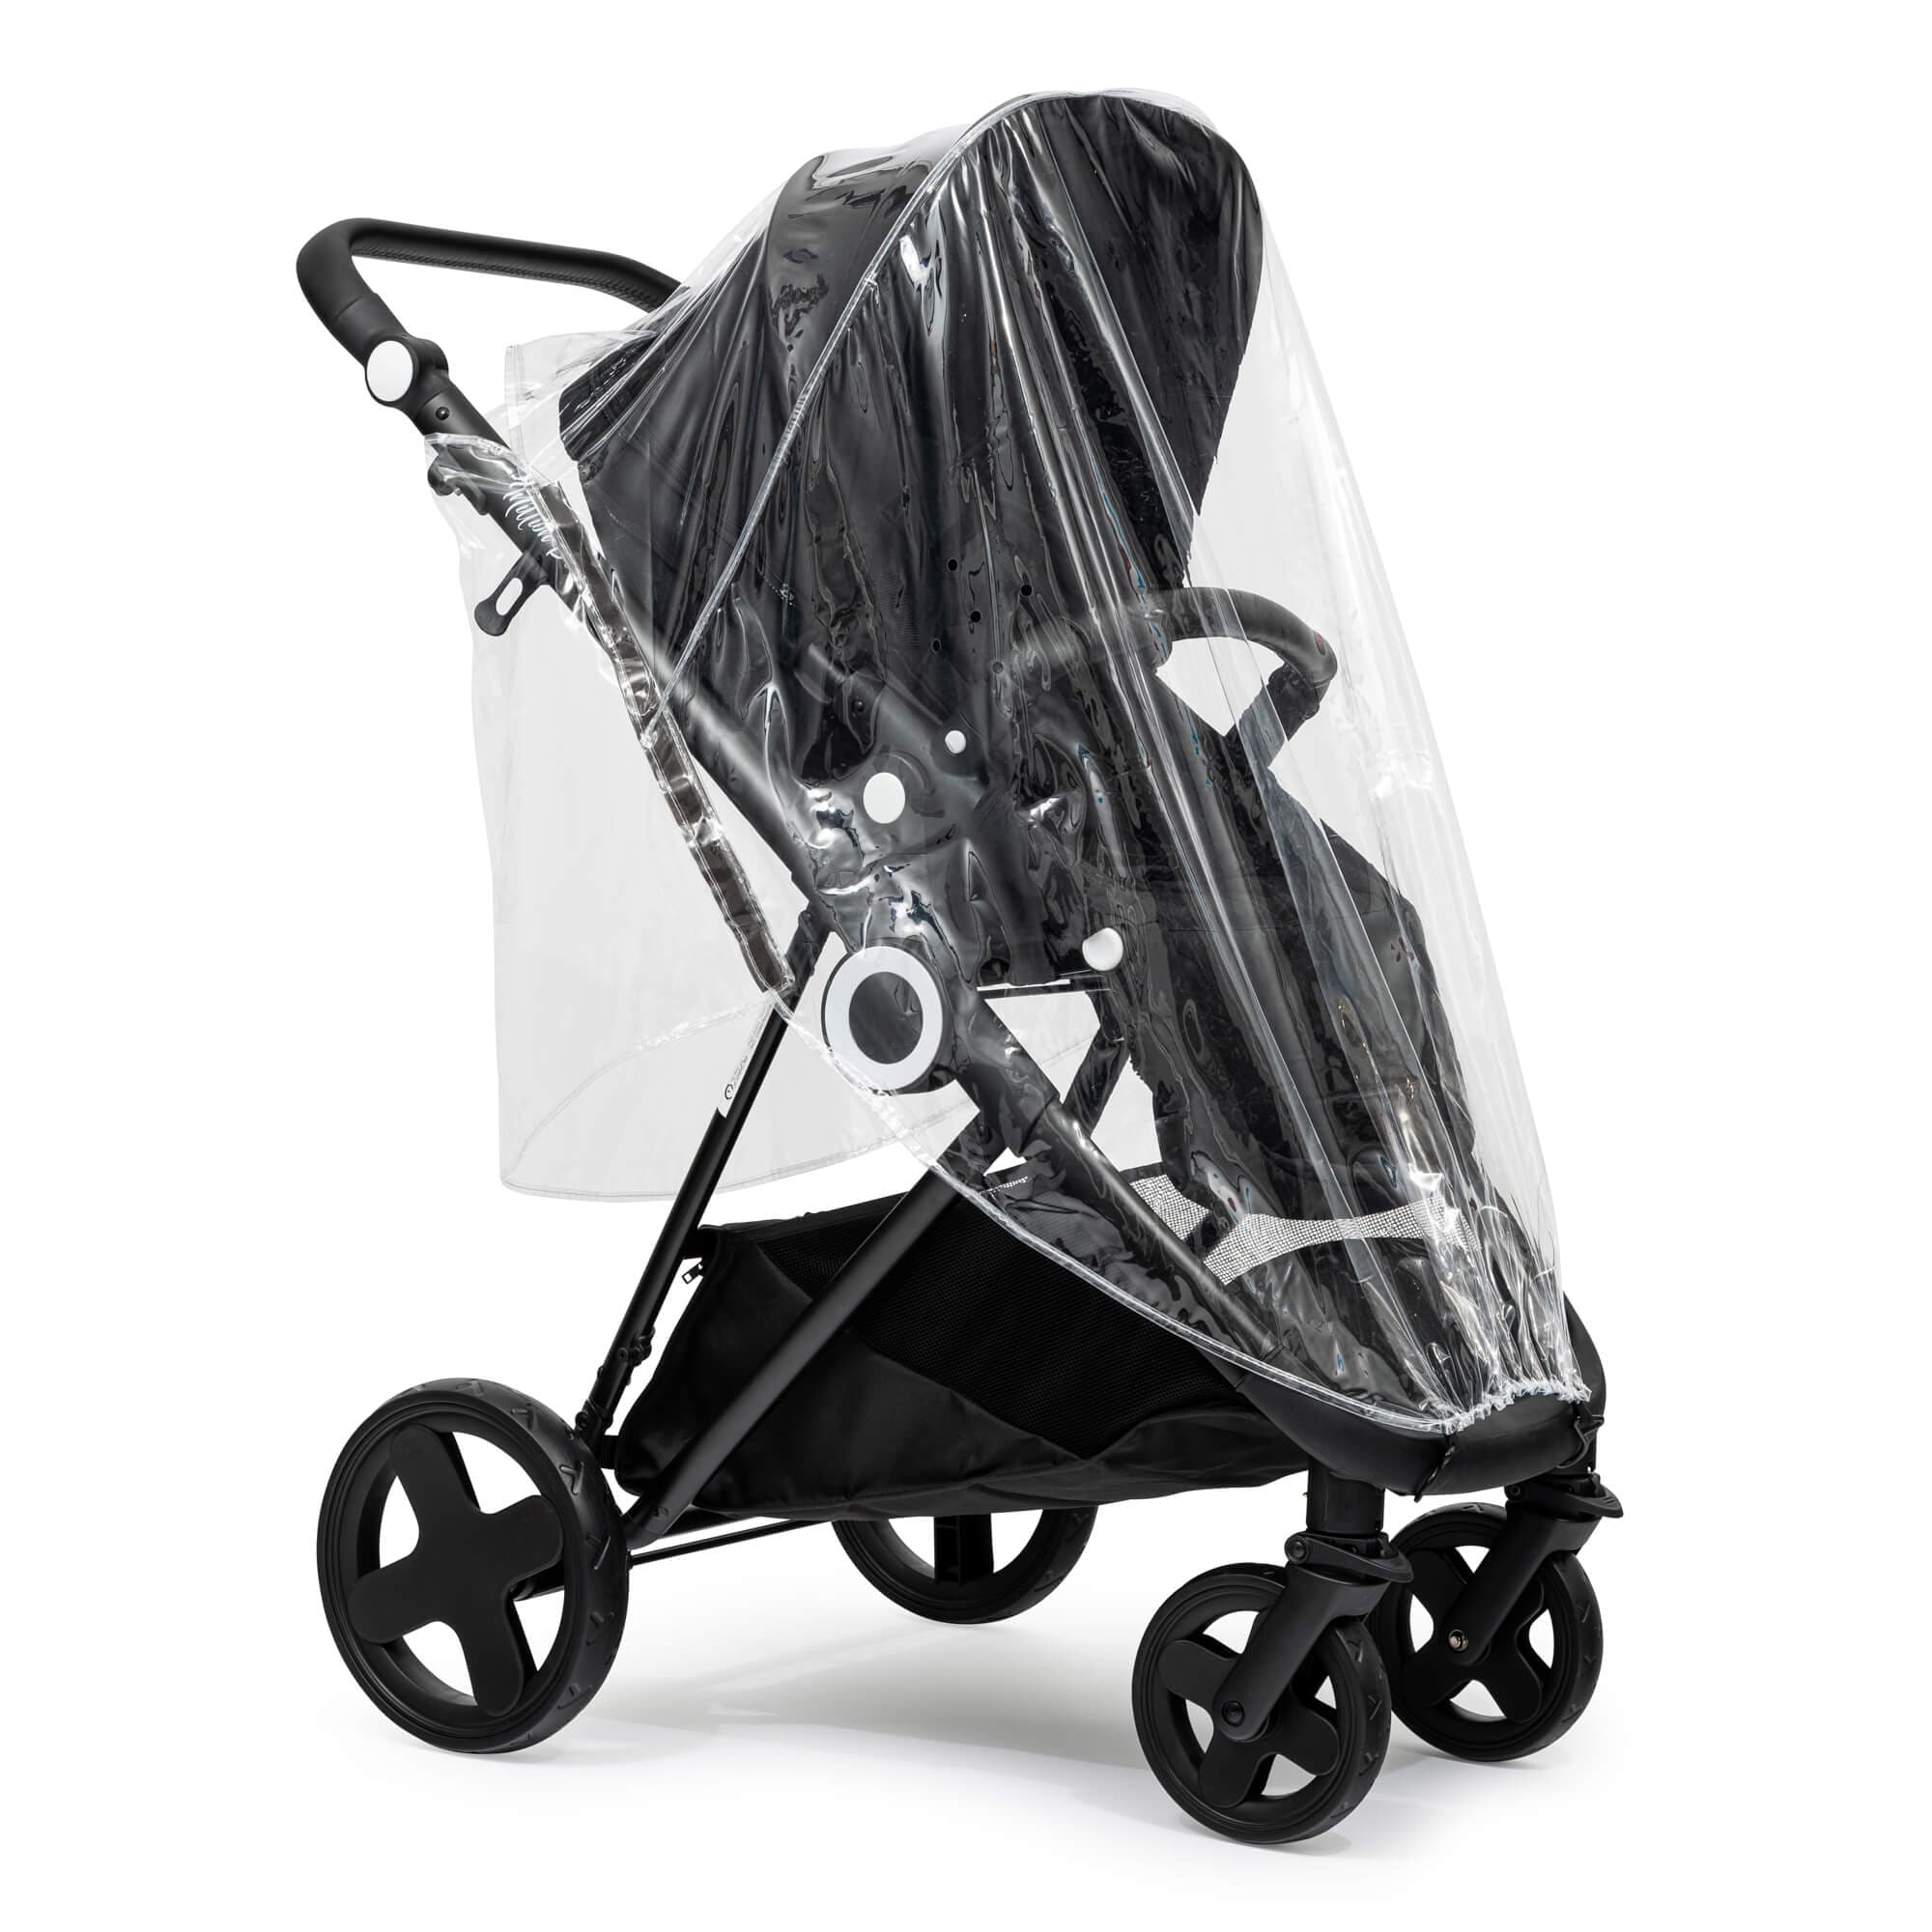 Pushchair Raincover Compatible with Orbit Baby - For Your Little One